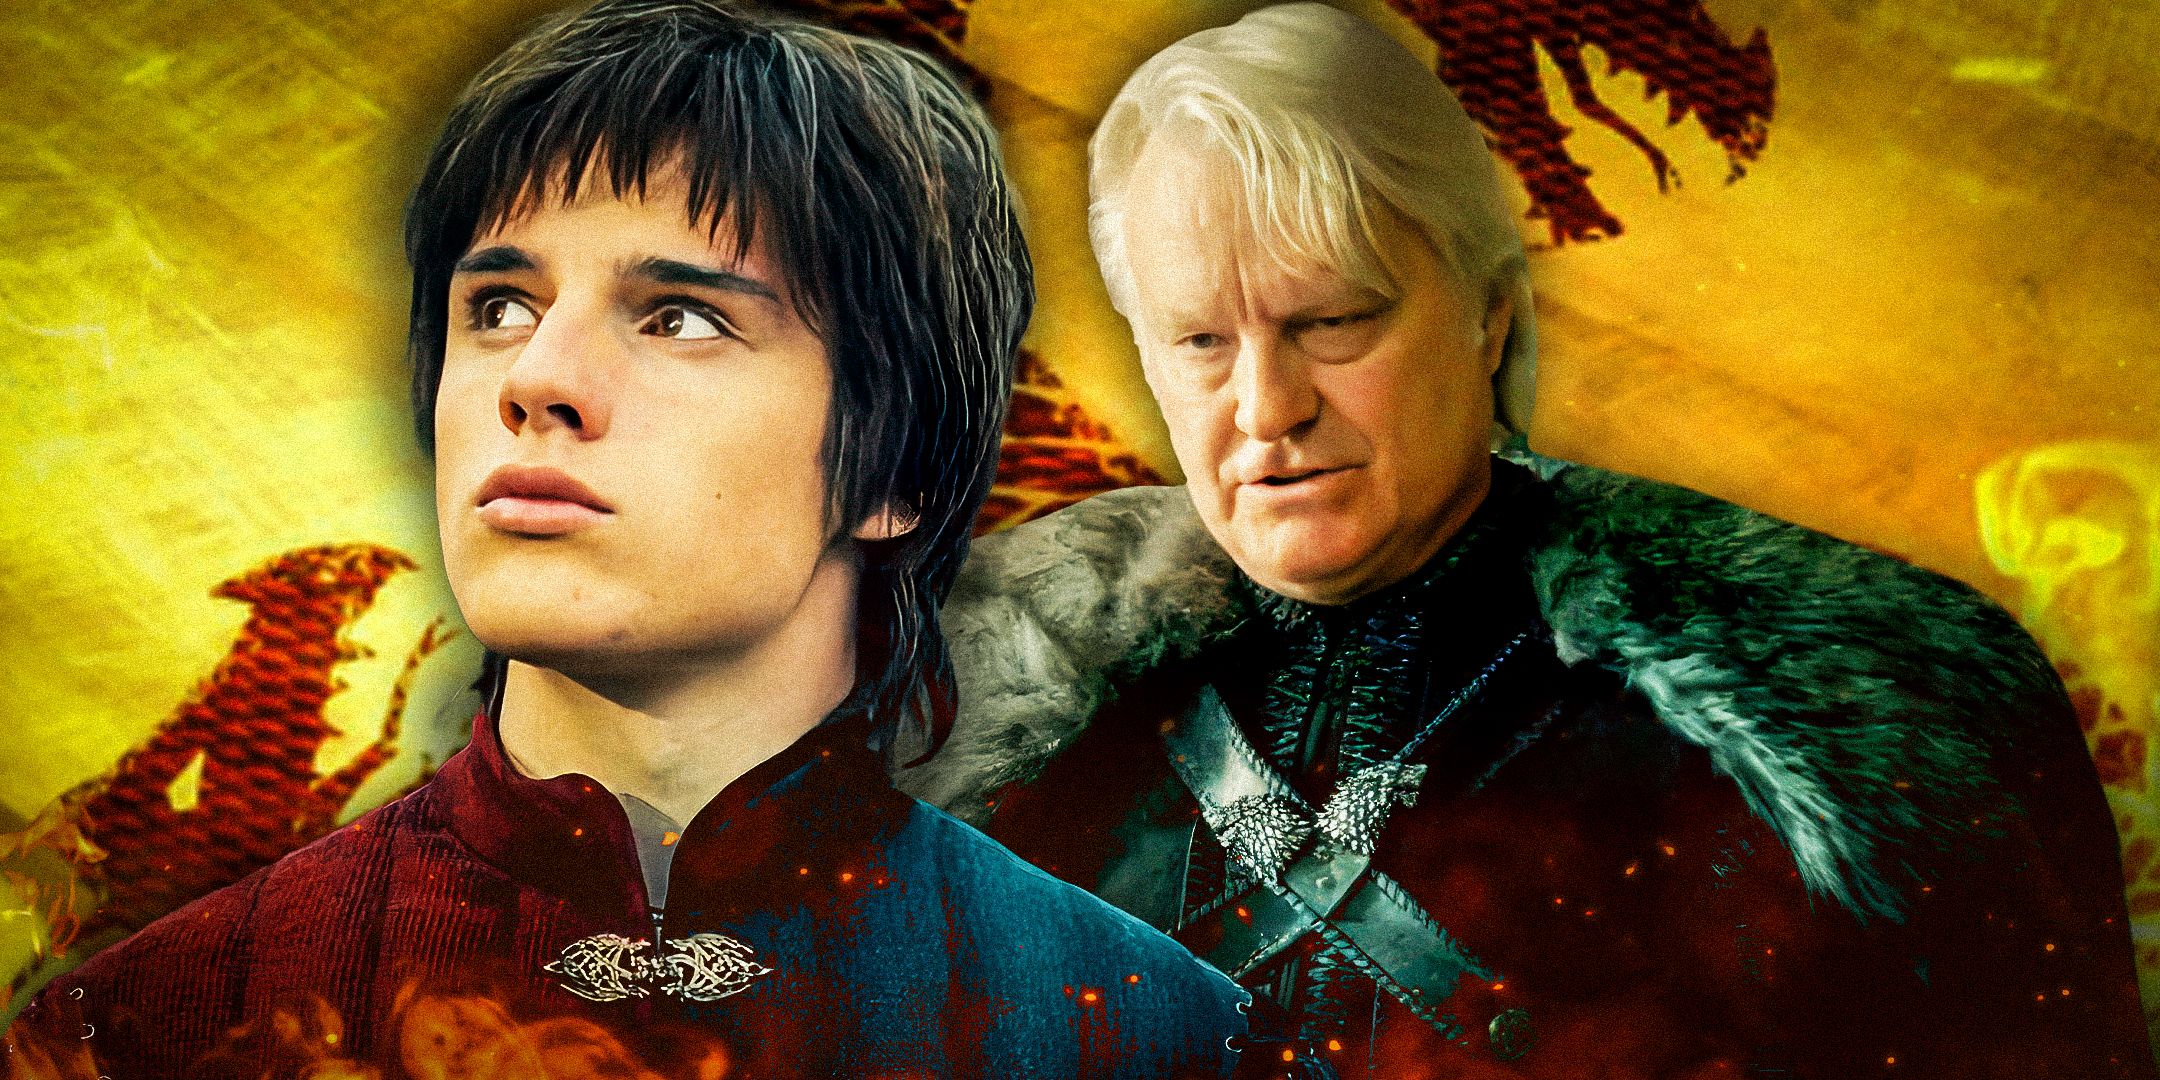 Prince Jacaerys Velaryon (Harry Collett) and Lord Rickon Stark in House of the Dragno with dragon backgrounds